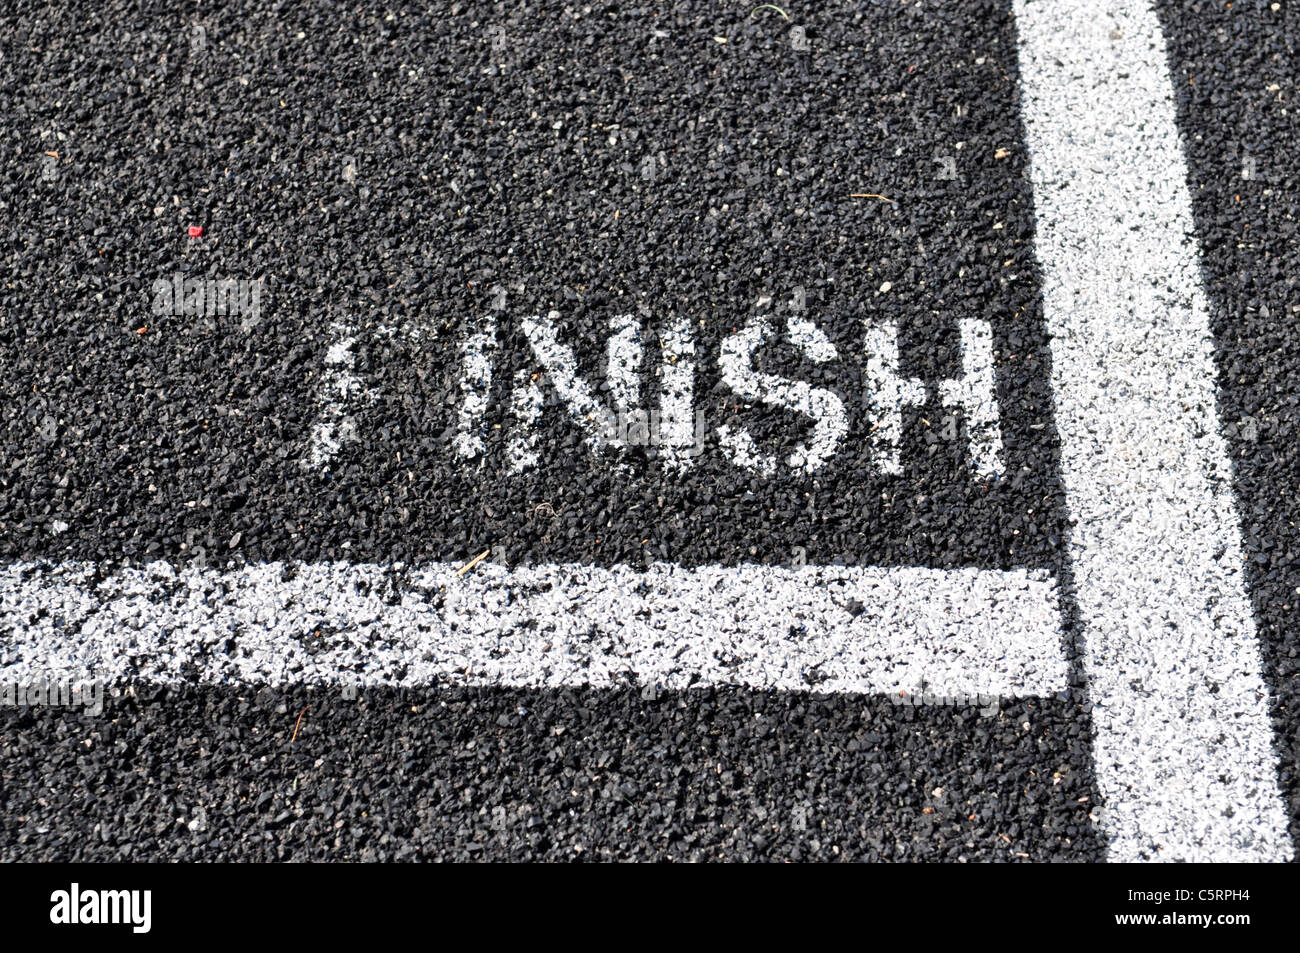 The worn finish line painted on a black top running tract. Stock Photo